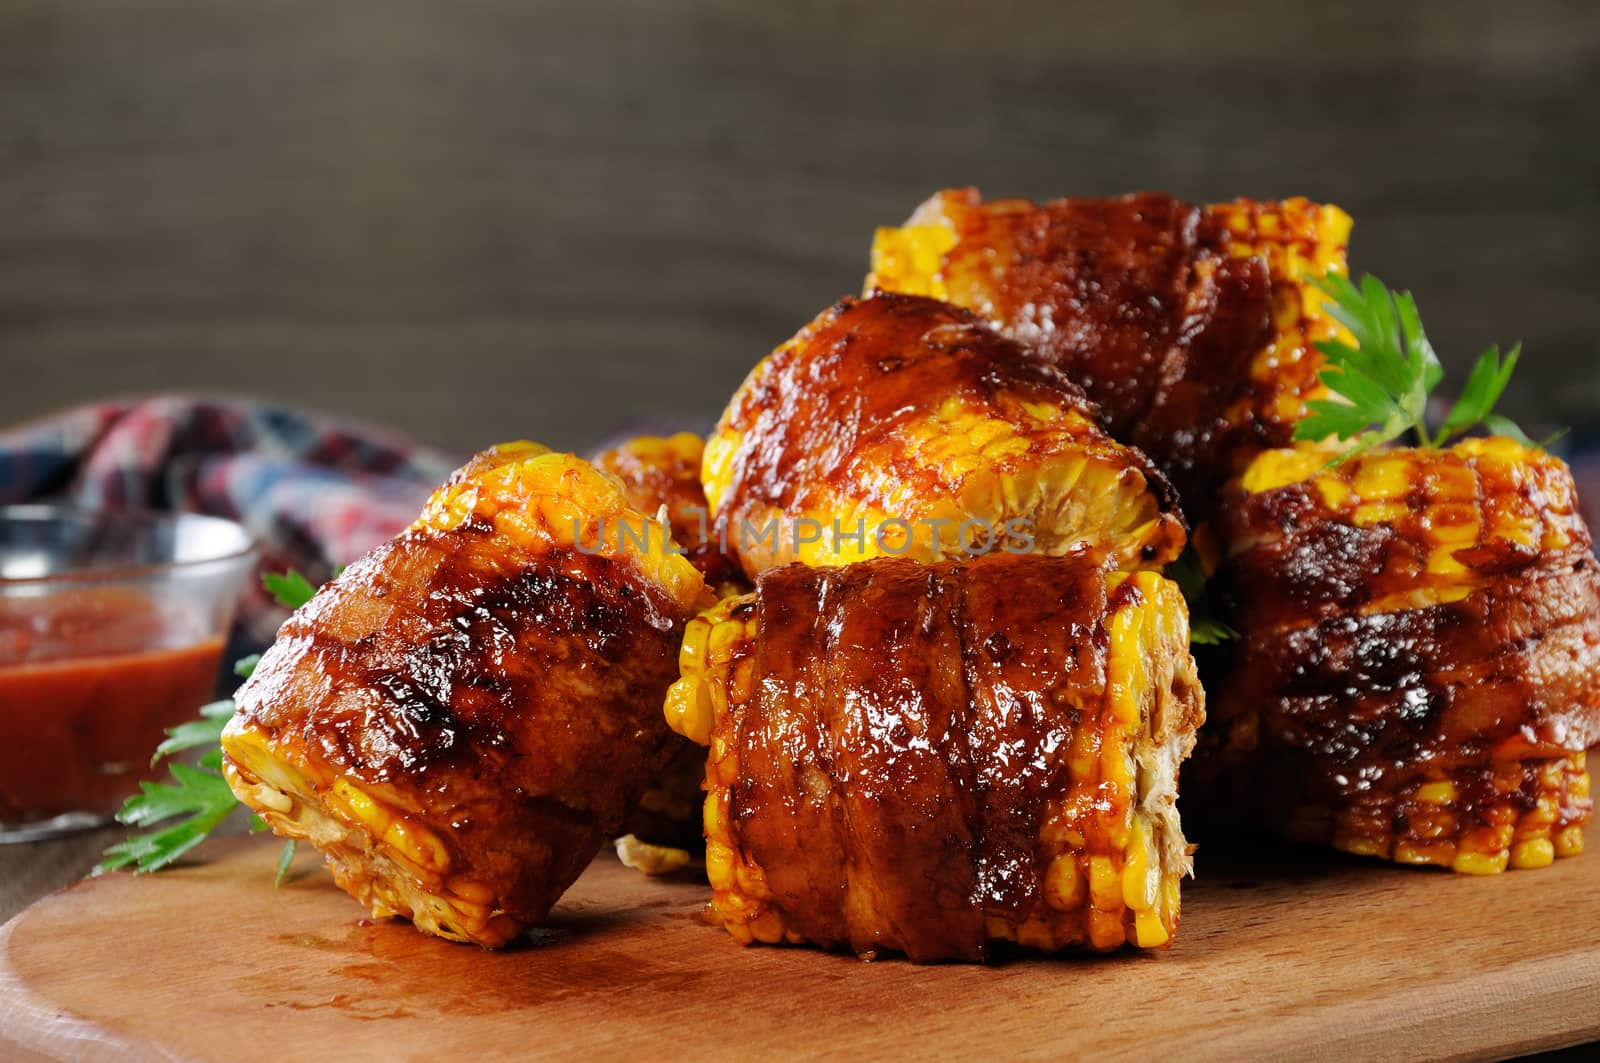 Grilled corn wrapped in bacon by Apolonia